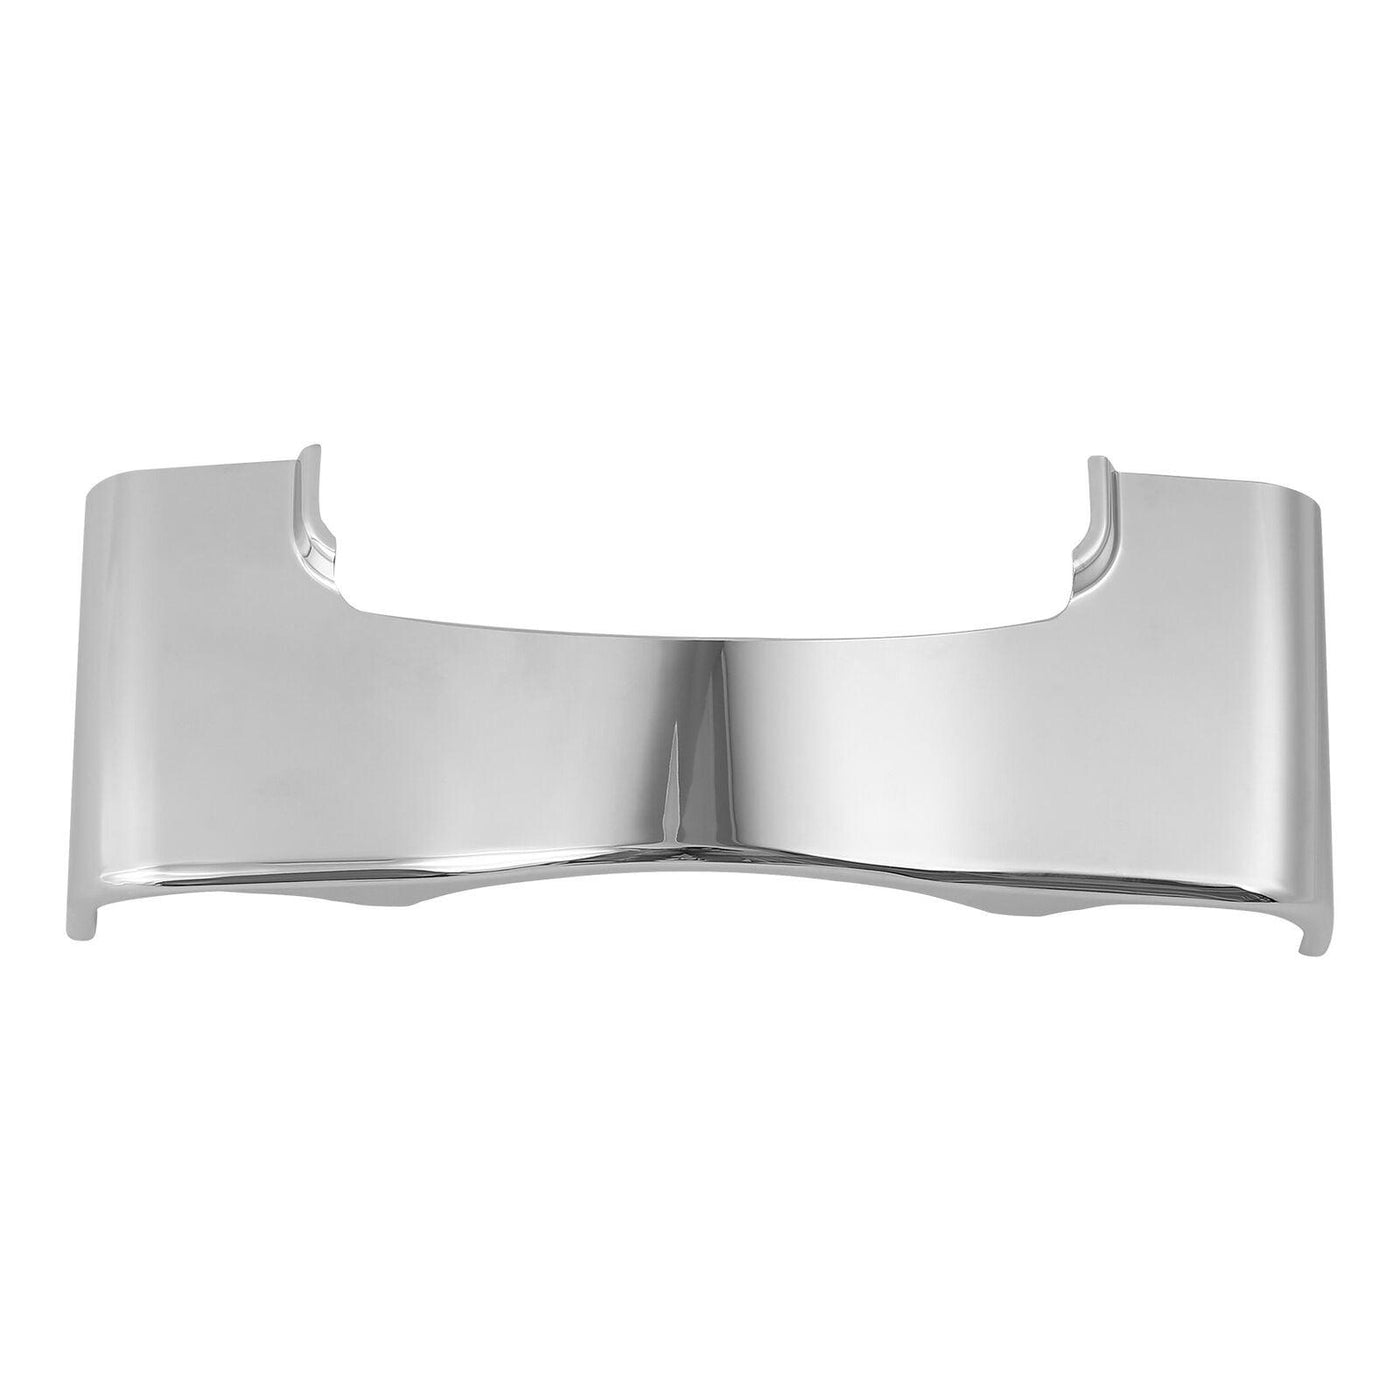 Chrome ABS Outer Fairing Trim Skirt Fit For Harley Road Glide Models 15-22 16 17 - Moto Life Products